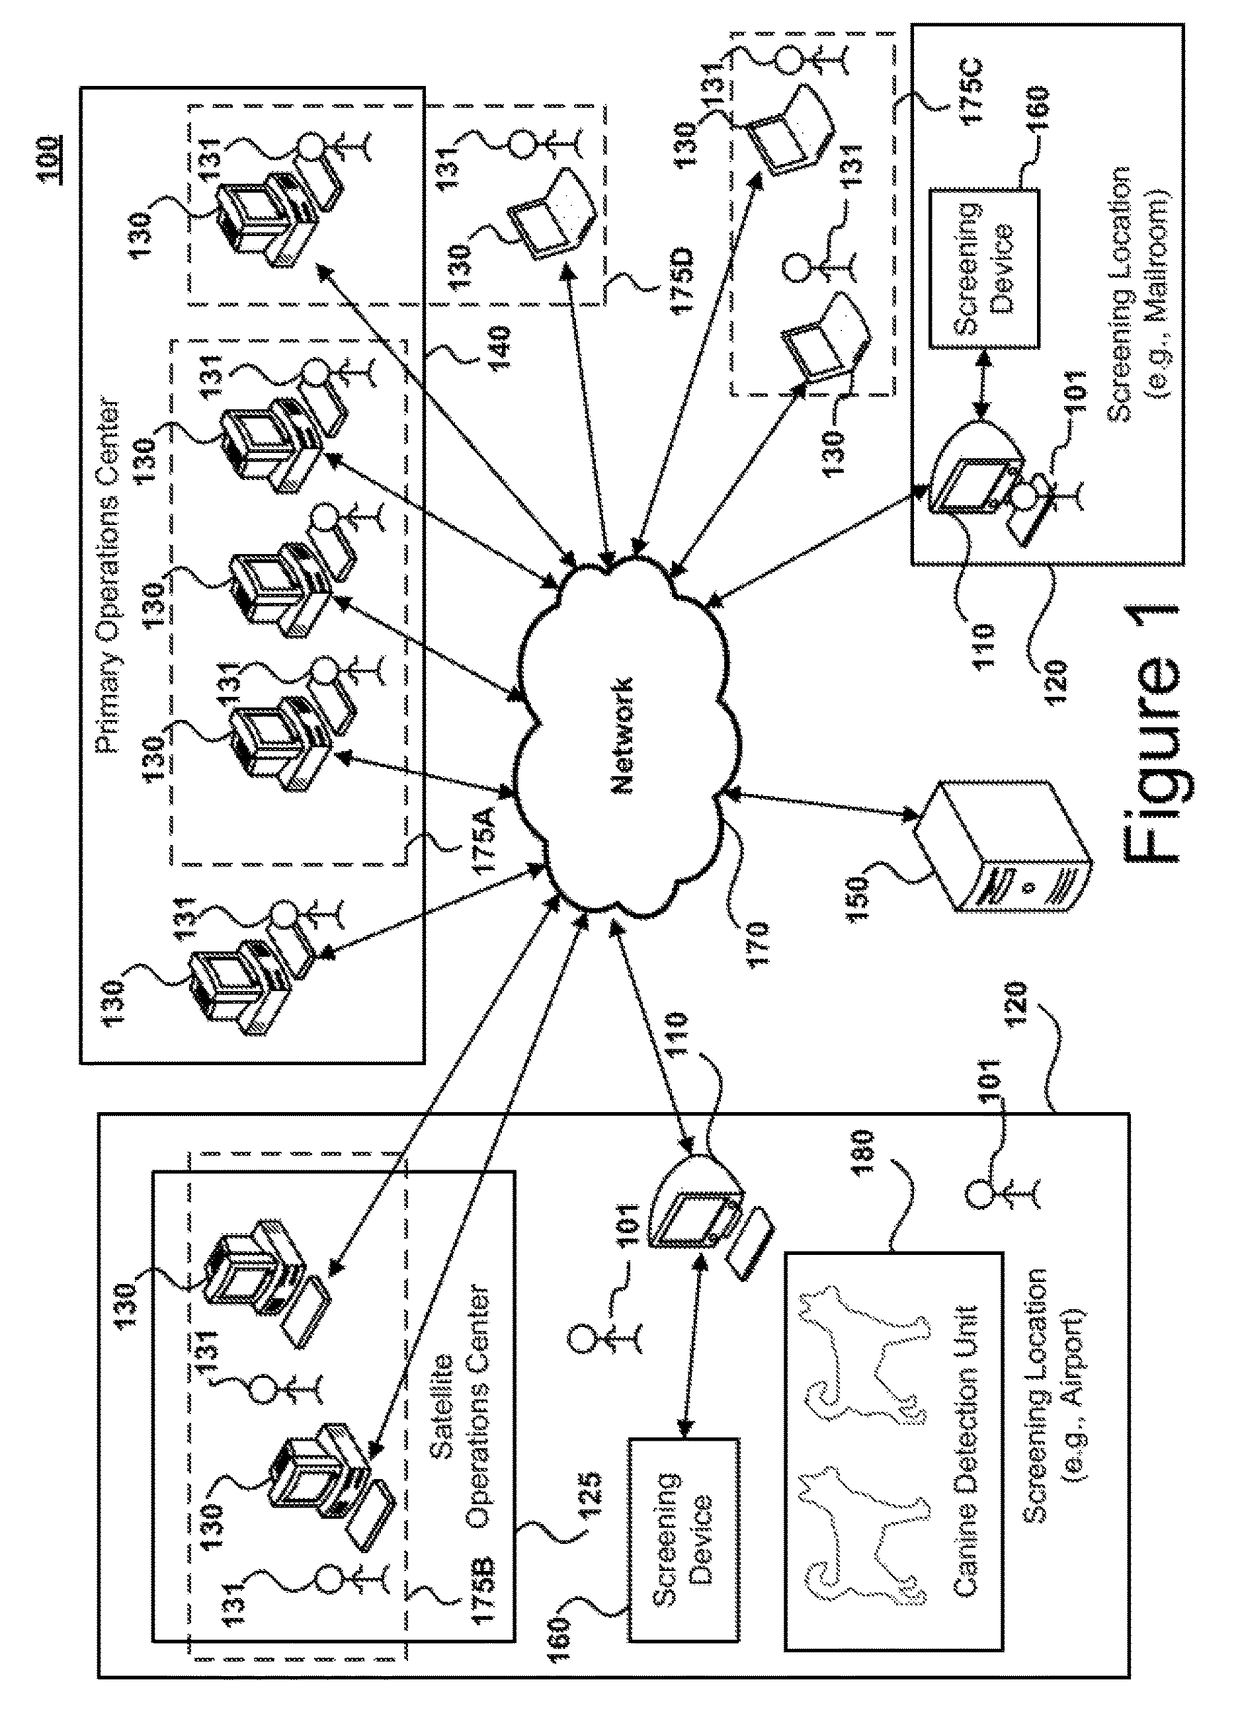 Systems and methods for facilitating remote security threat detection